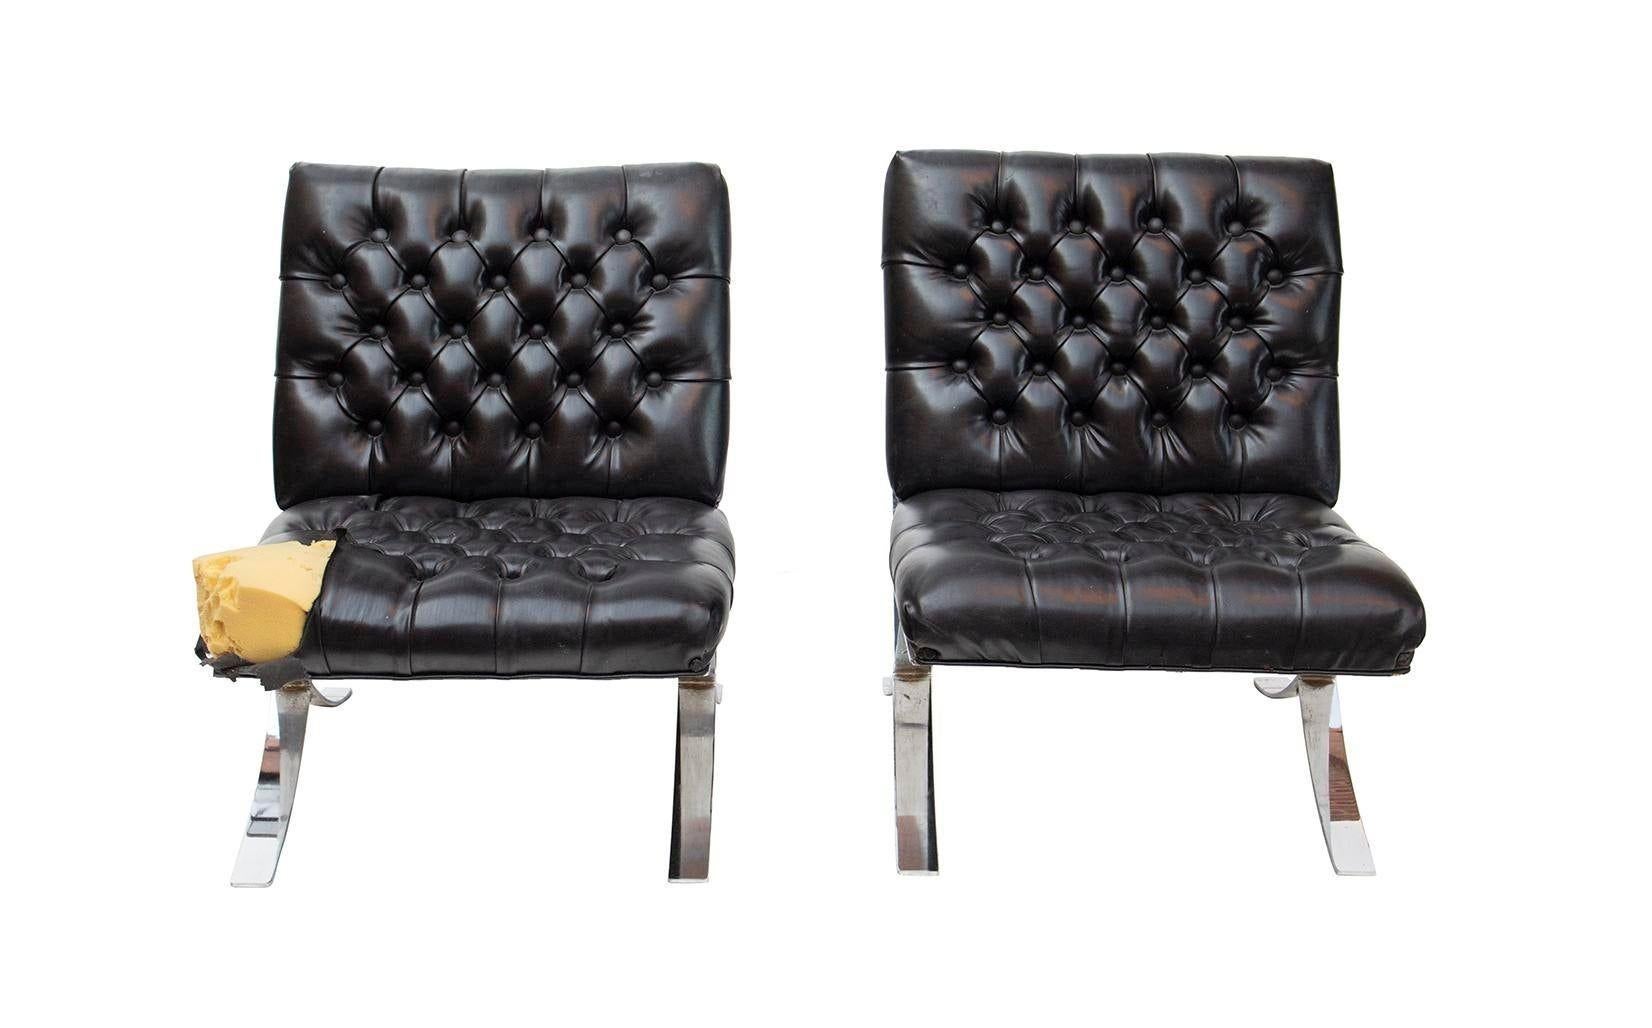 Mid-Century Modern Tufted Barcelona-Style Chairs with Chrome Frames